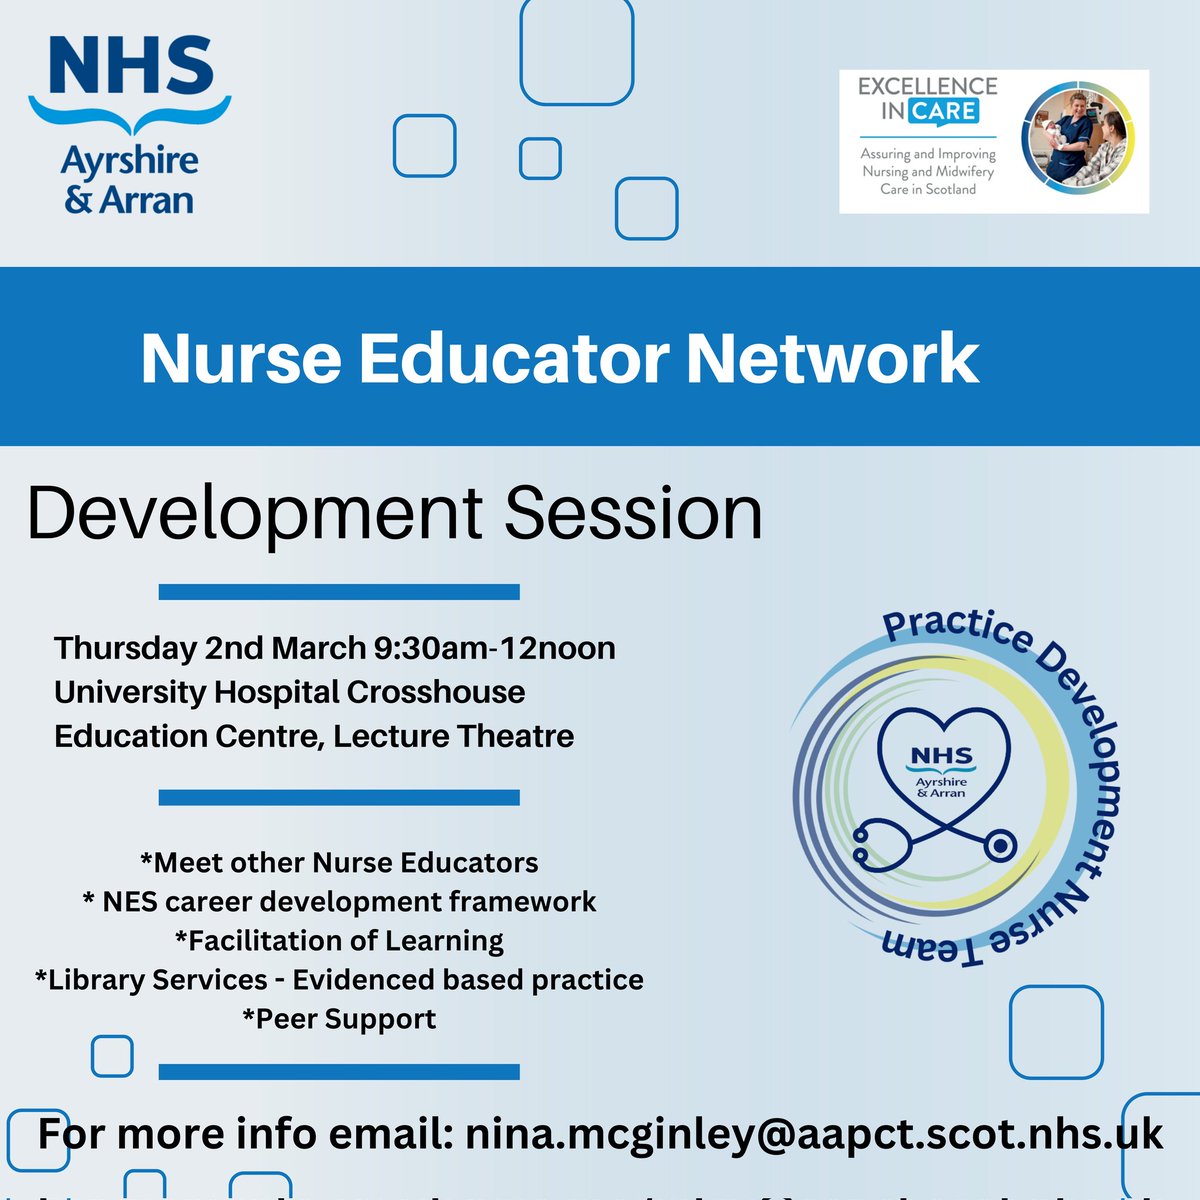 Are you a nurse/midwife in @nhsaaa and facilitate learning as part of your role? Come along to @PD_nursesEiC first Nurse Educator Development Session & meet other educators #sharedlearning #sharedknowledge #peersupport #resources